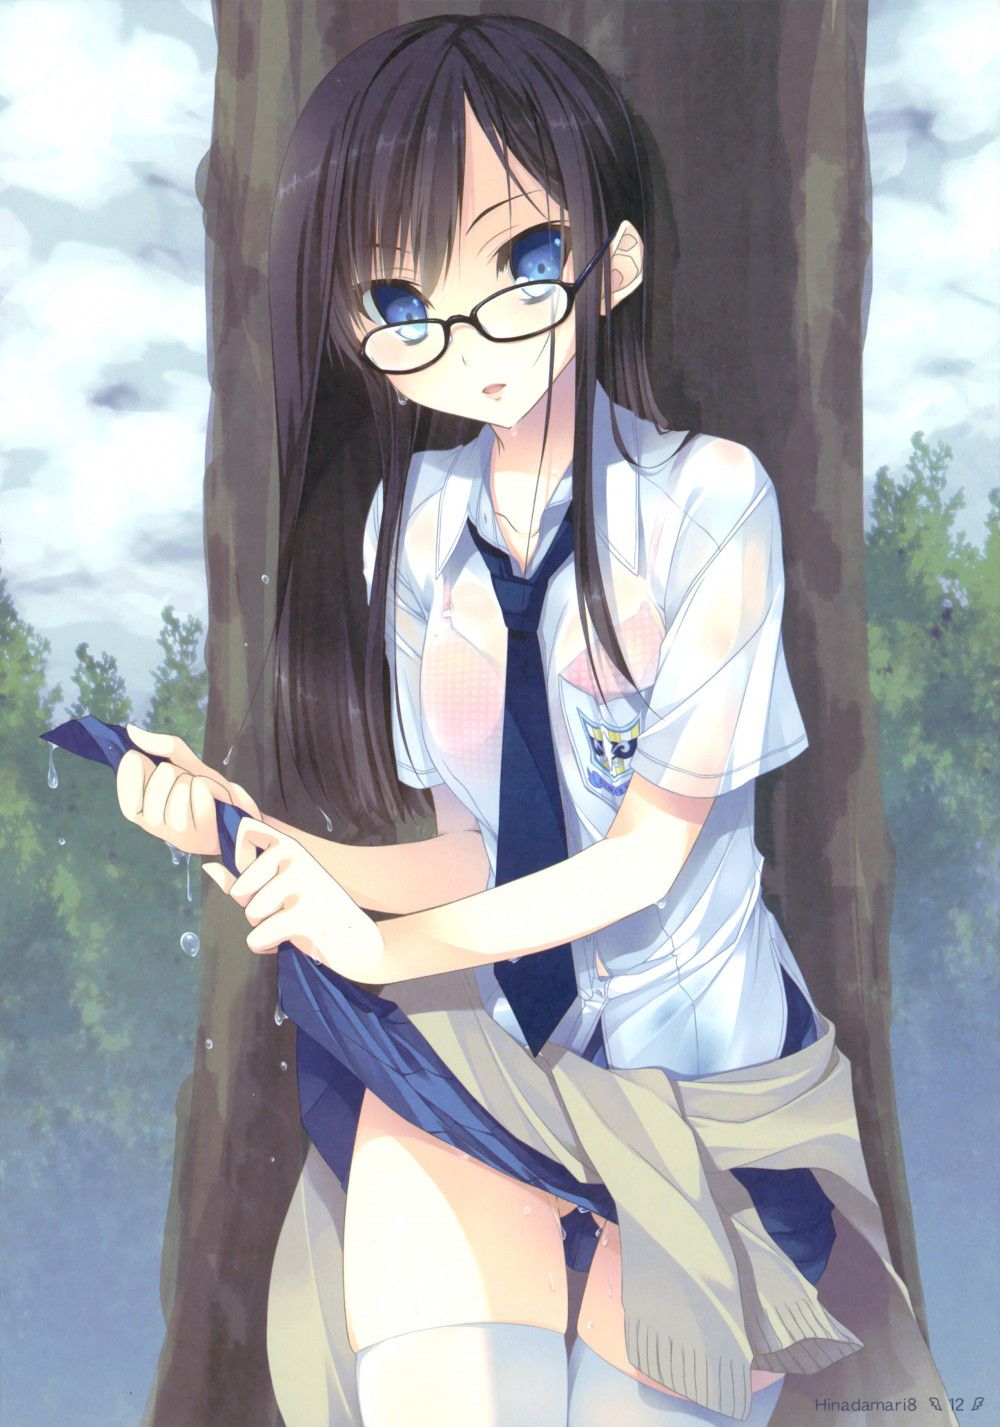 [Secondary] glasses girl Hooray! [Images] part 4 30